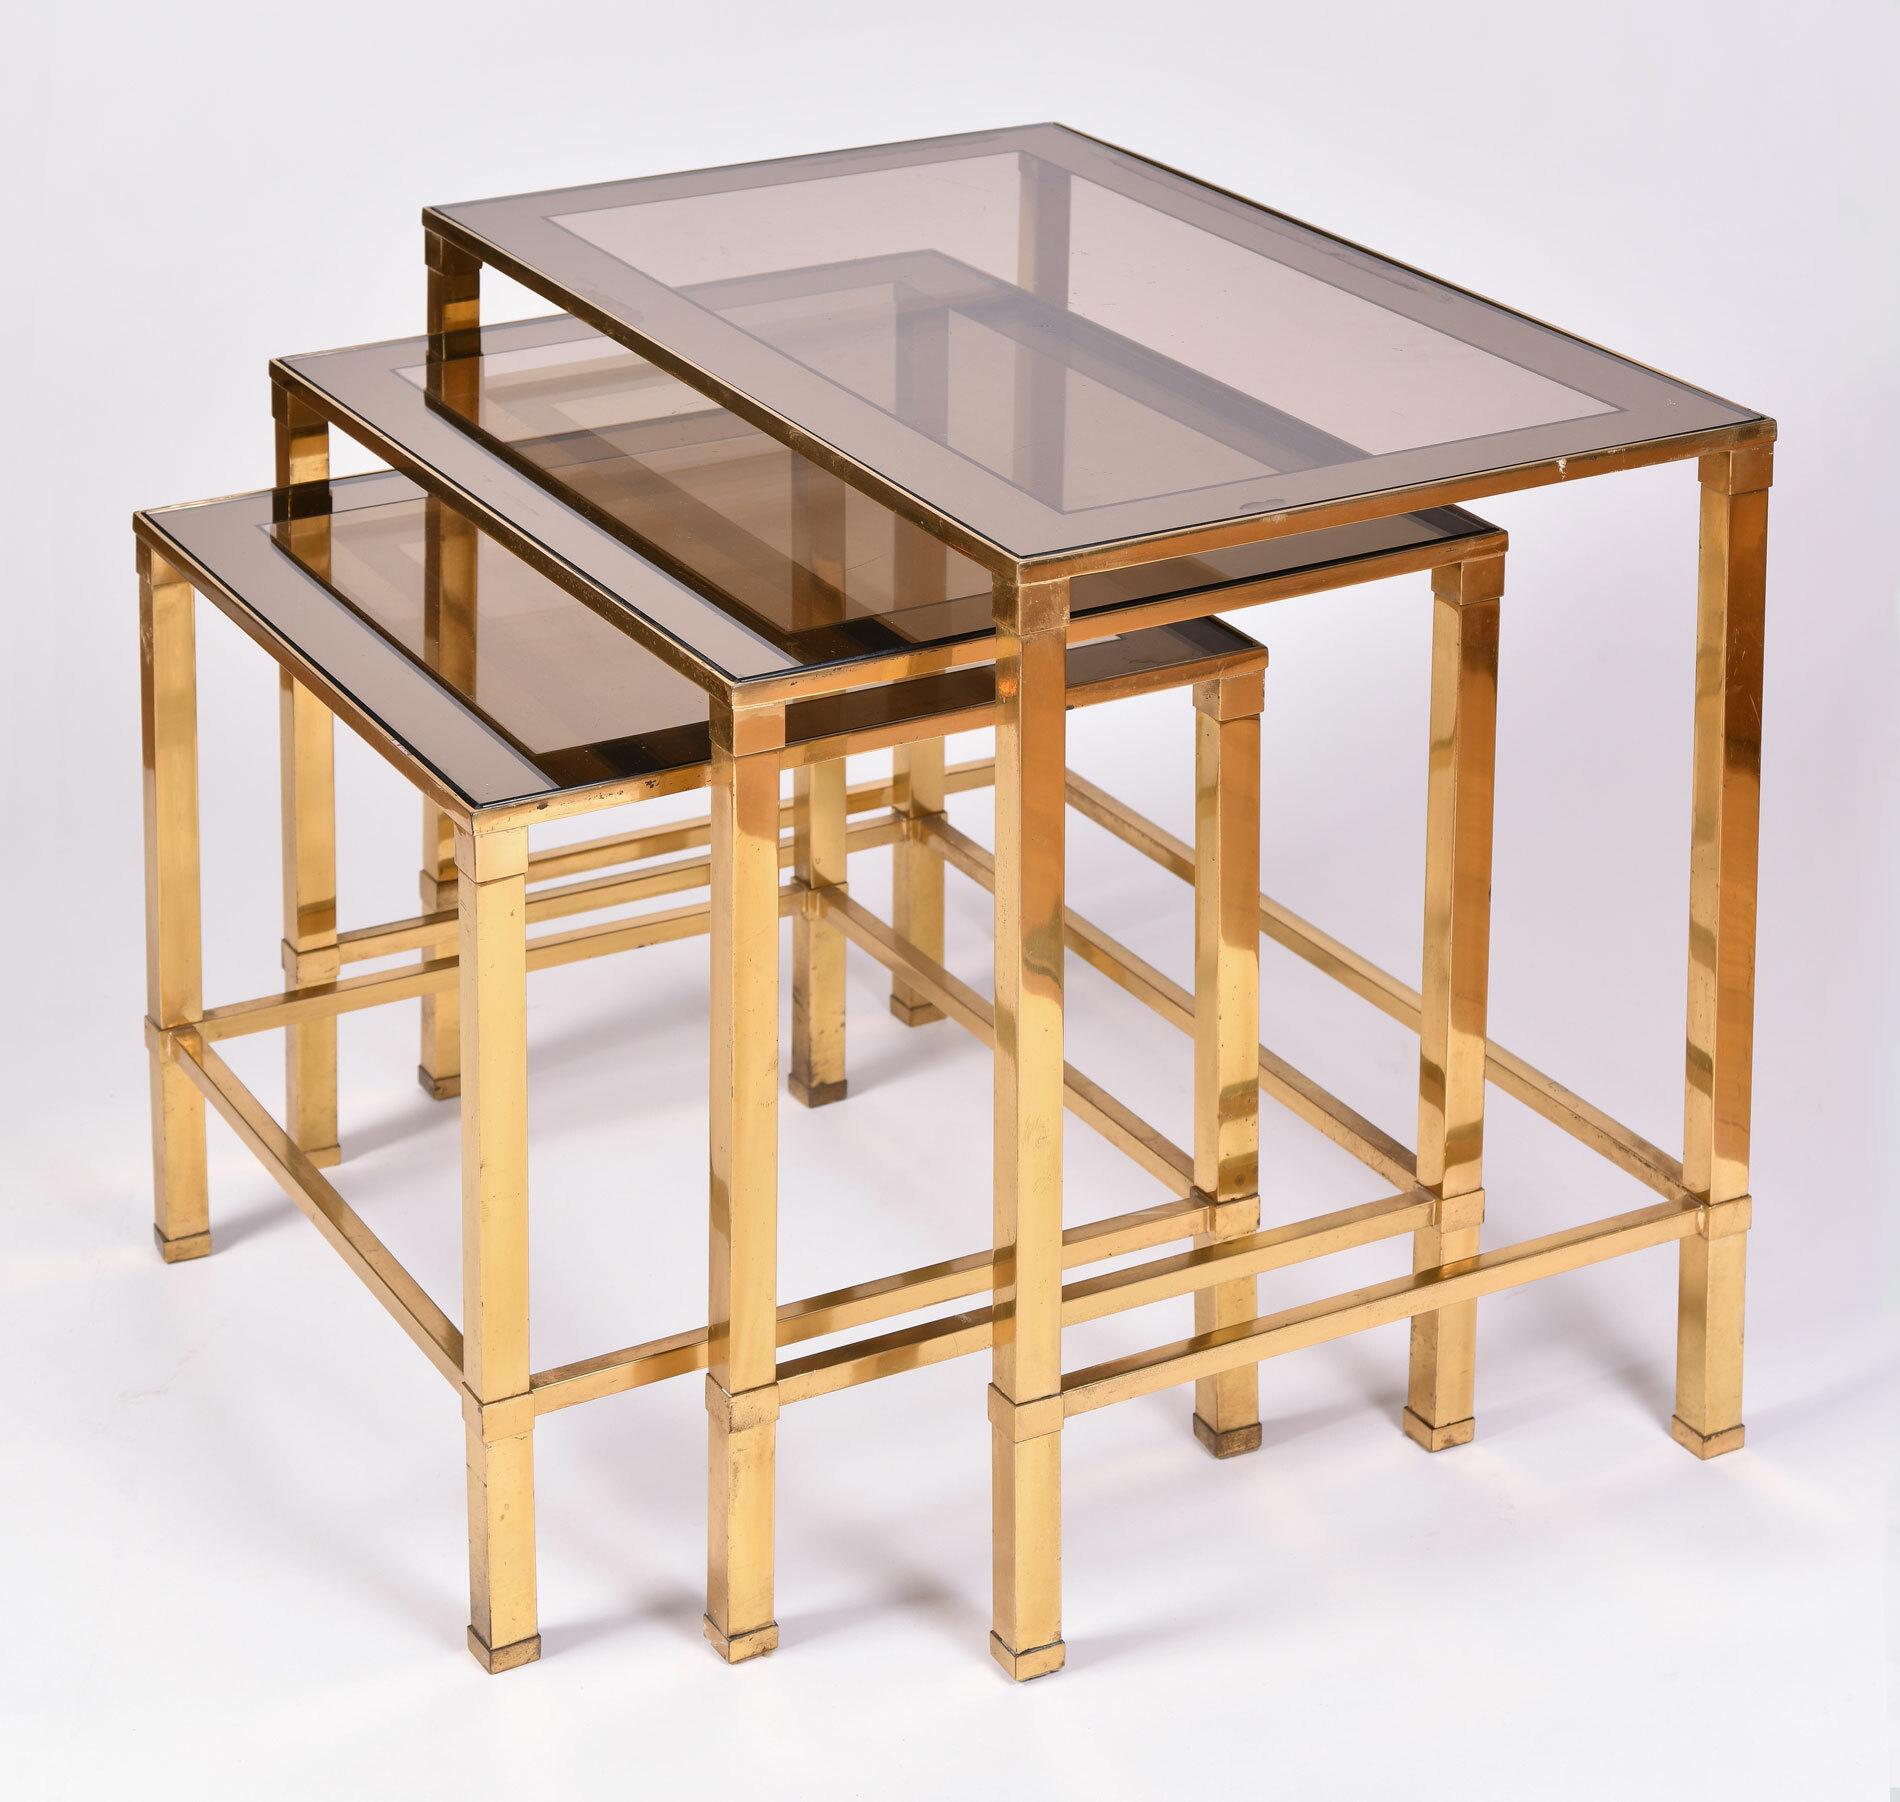 Rectangular nest of three Italian brass side tables. Each table inset with smoky glass with mirrored surround.